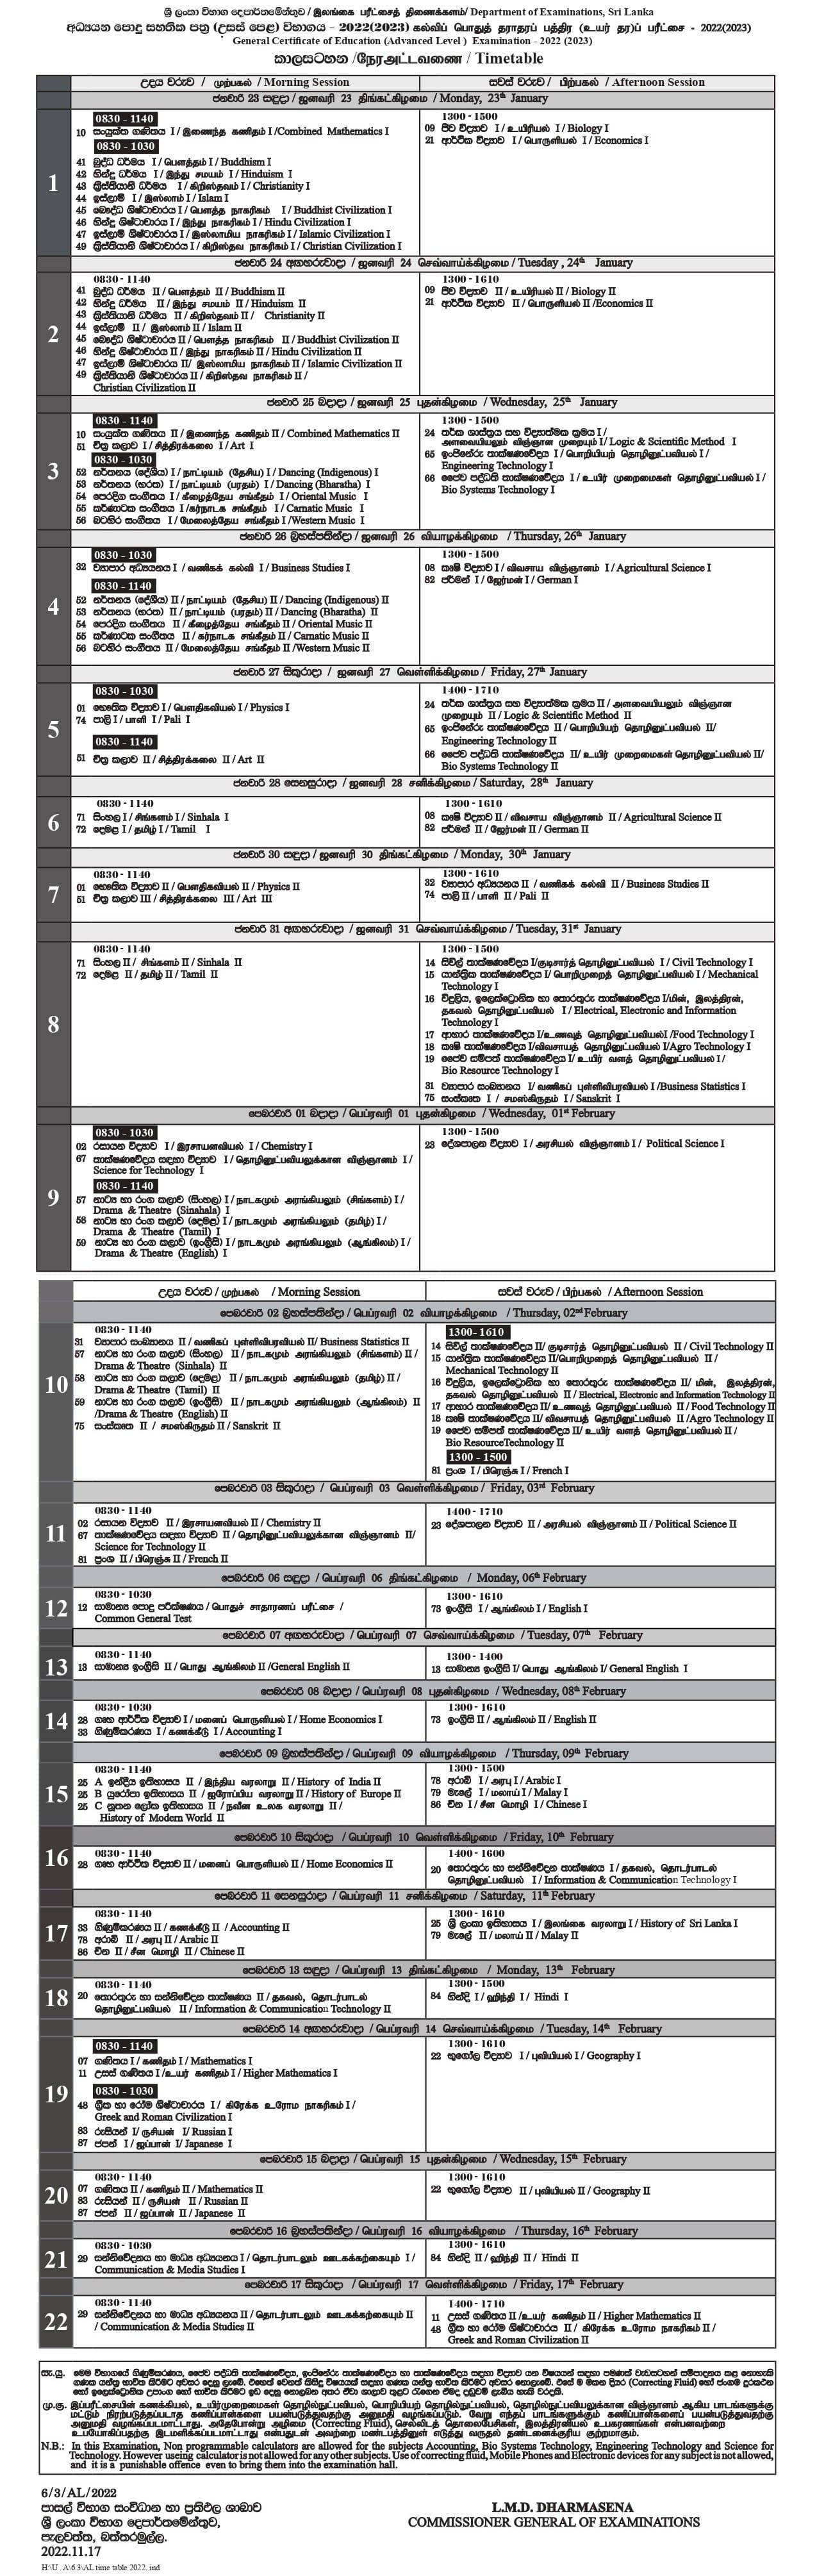 A/L Time Table 2022 (2023) - G.C.E. A/L Examination Time Table in Sinhala, Tamil English